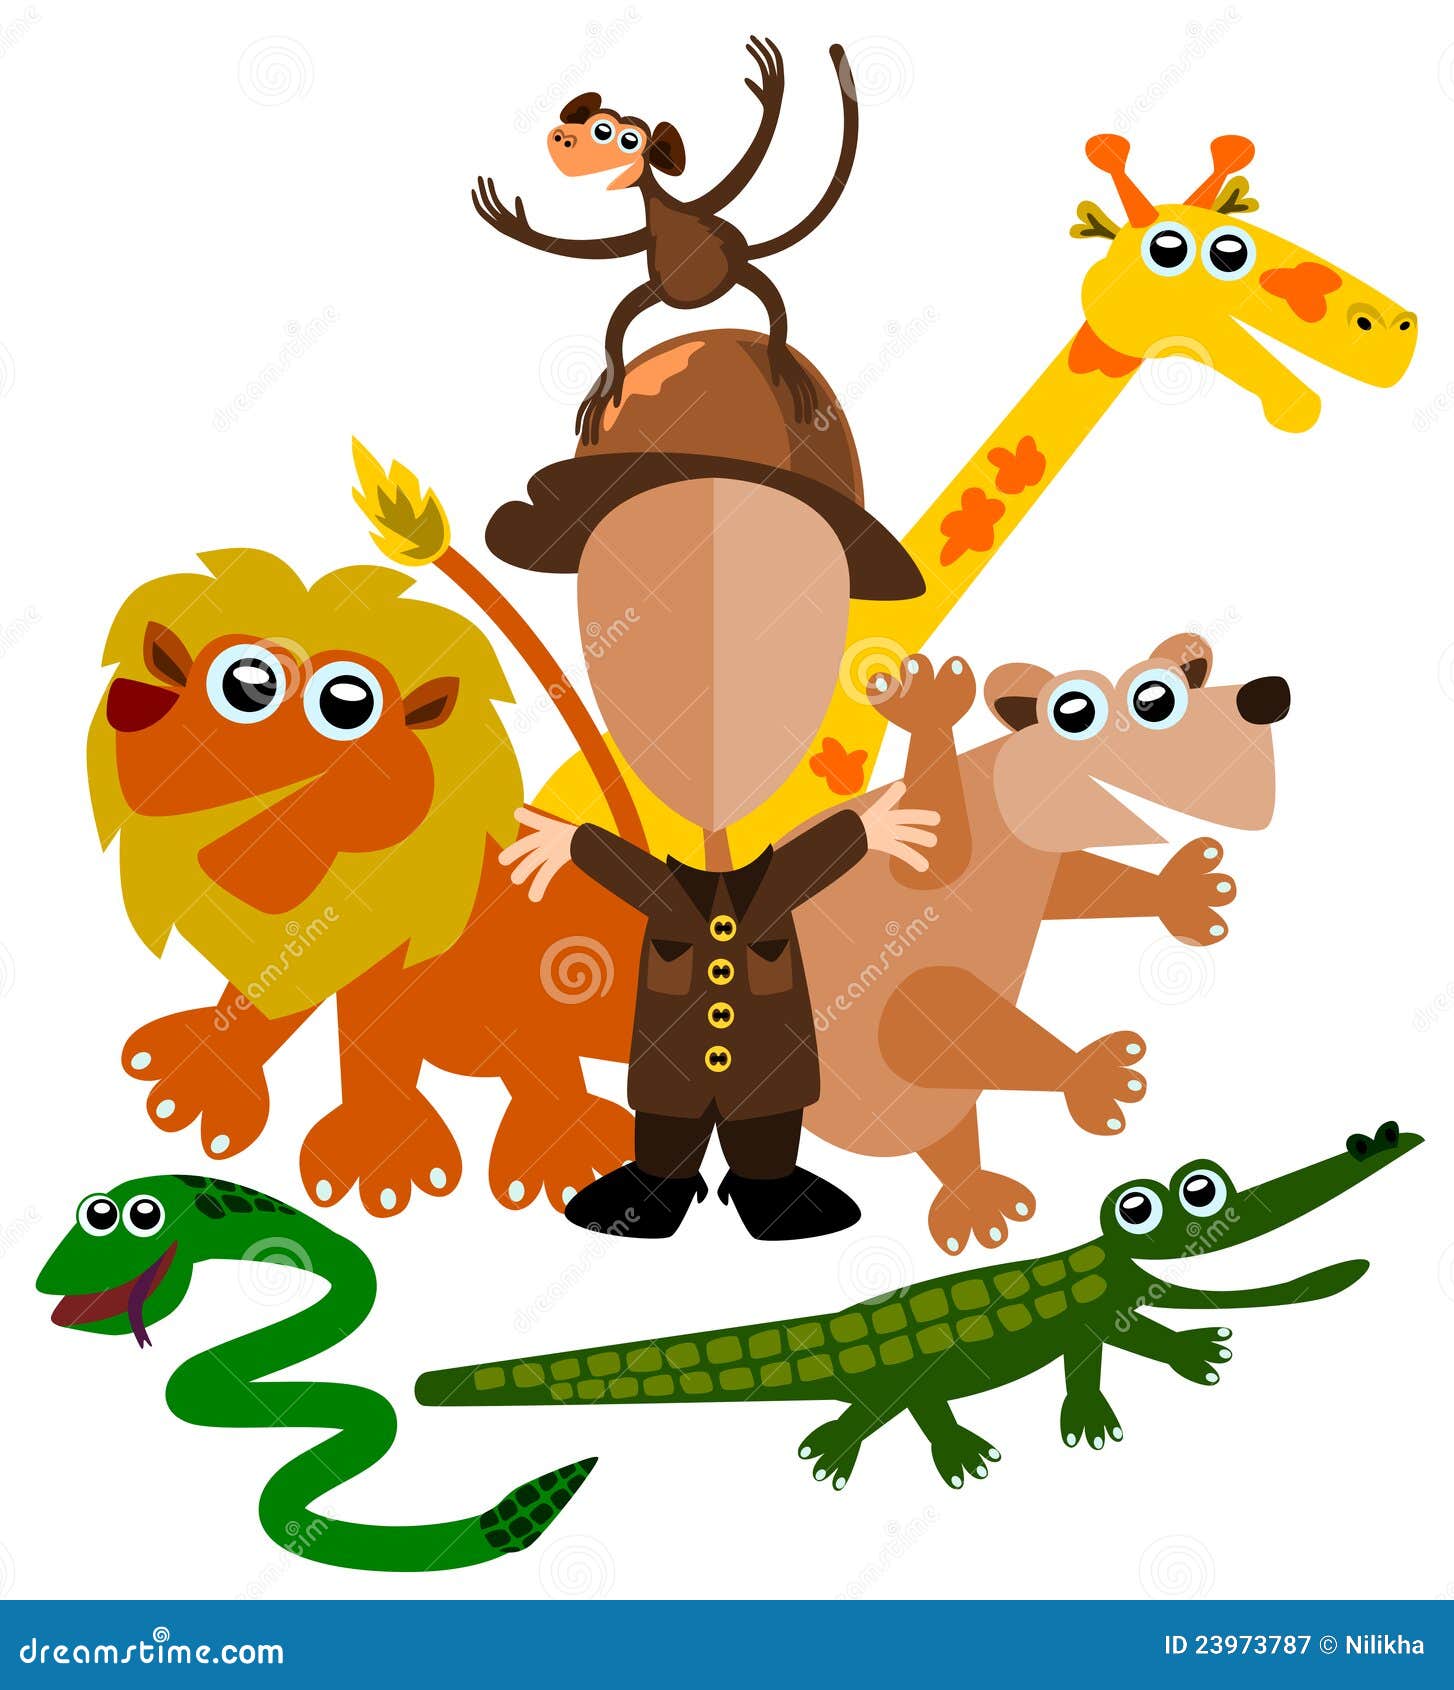 Keeper Cartoons, Illustrations & Vector Stock Images - 7837 Pictures to ... Girl Cartoon Zoo Keeper